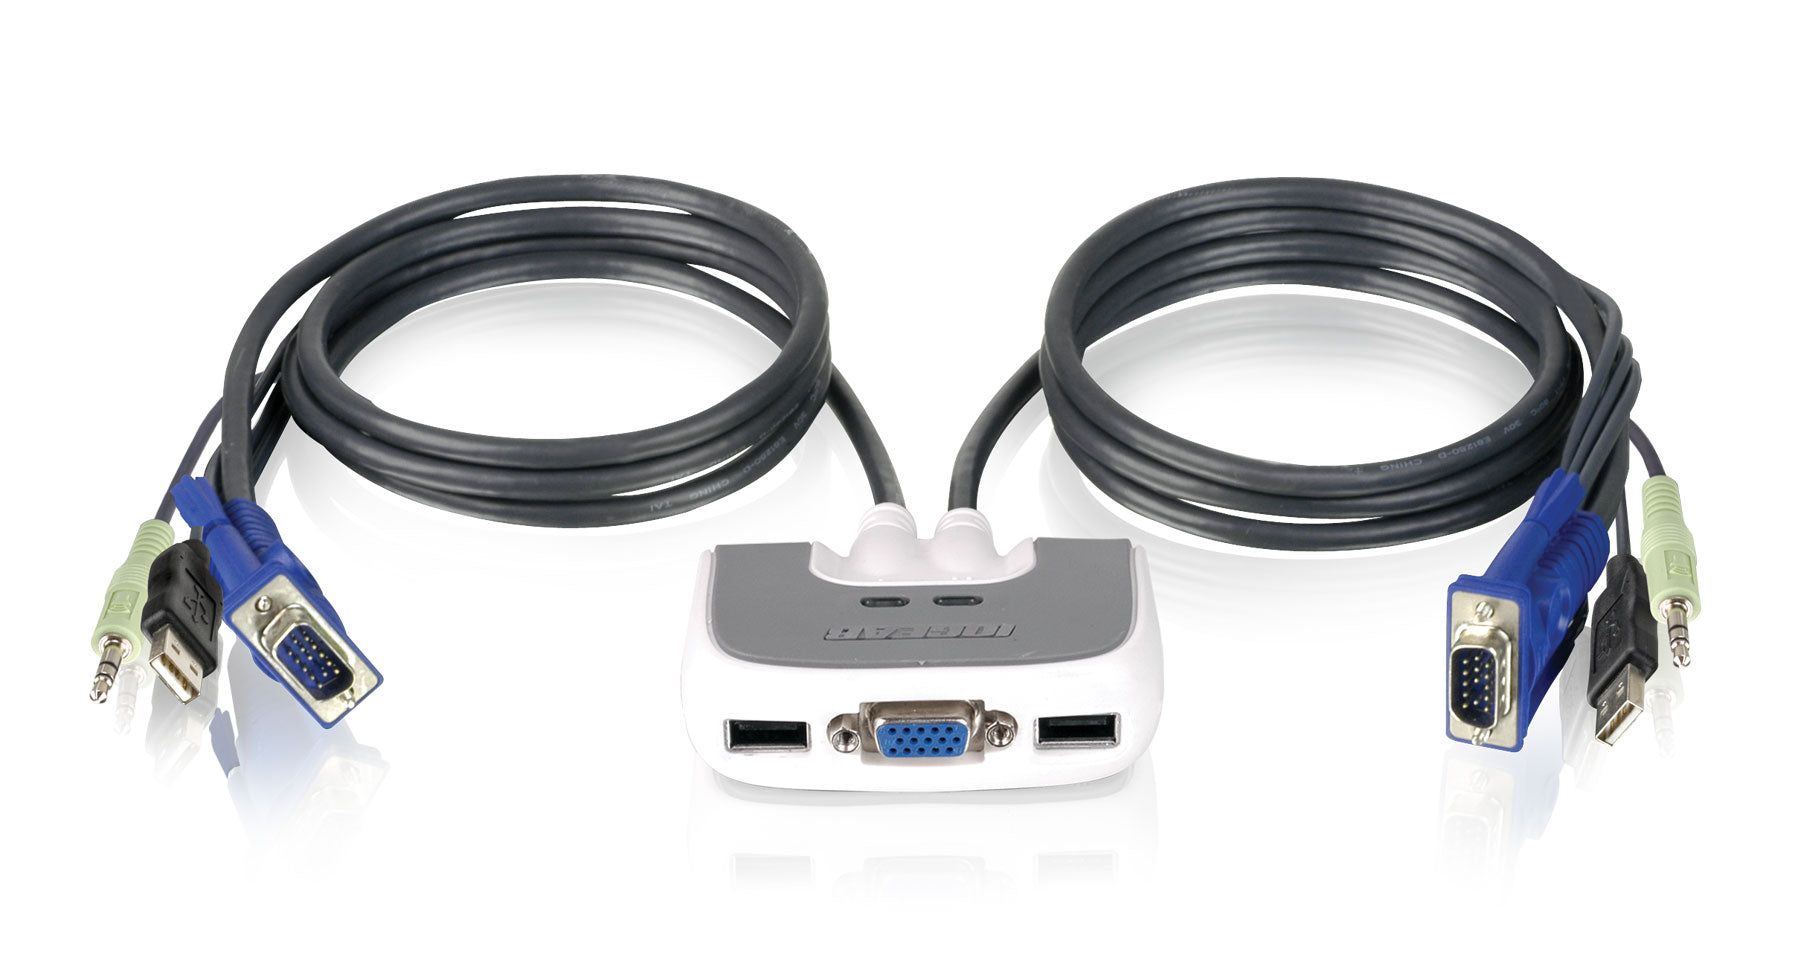 MiniView™ Micro USB PLUS KVM Switch with audio and cables